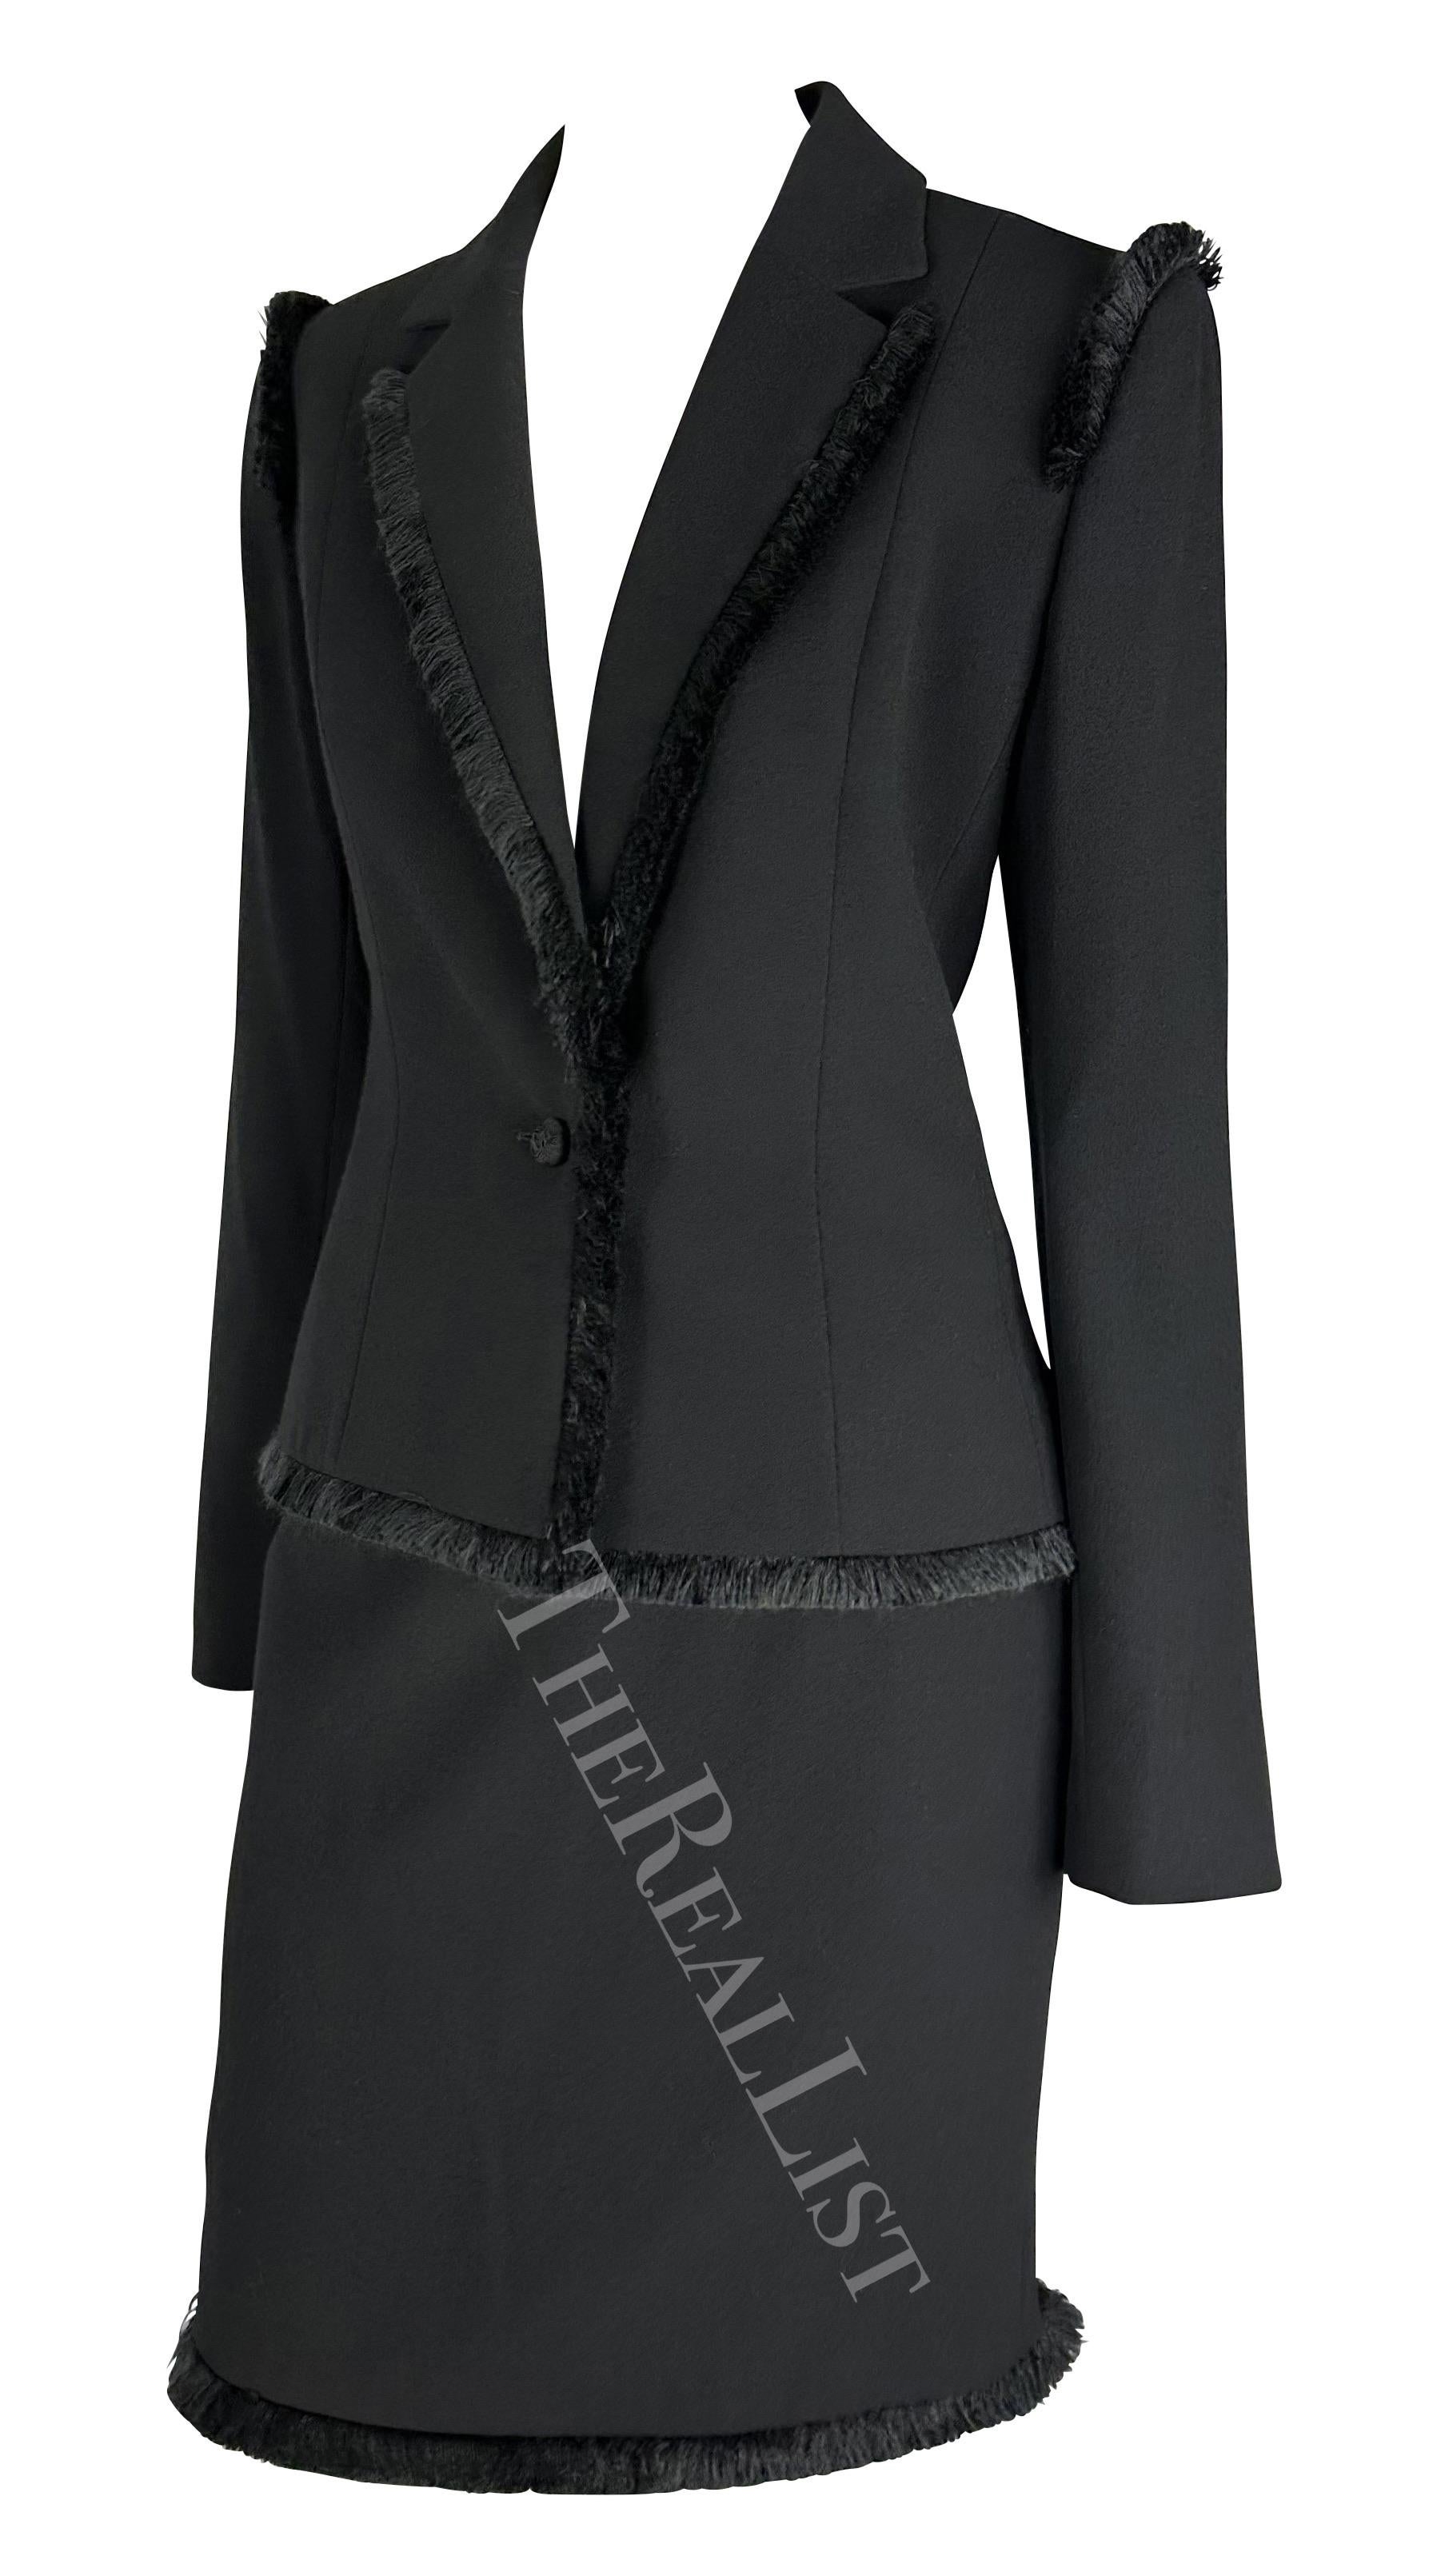 NWT F/W 1998 Christian Dior by John Galliano Black Fringe Skirt Suit In Excellent Condition For Sale In West Hollywood, CA